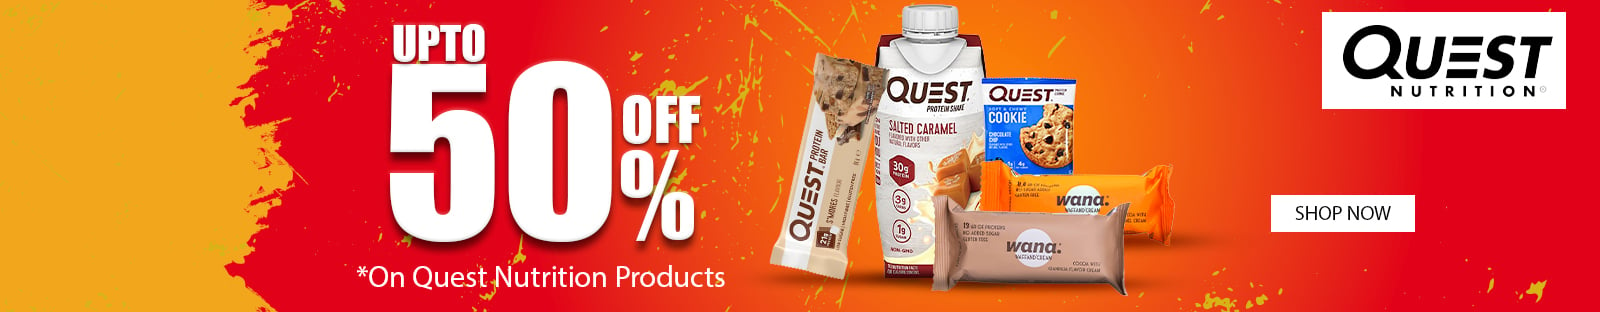 QUEST NUTRITION upto 50% 